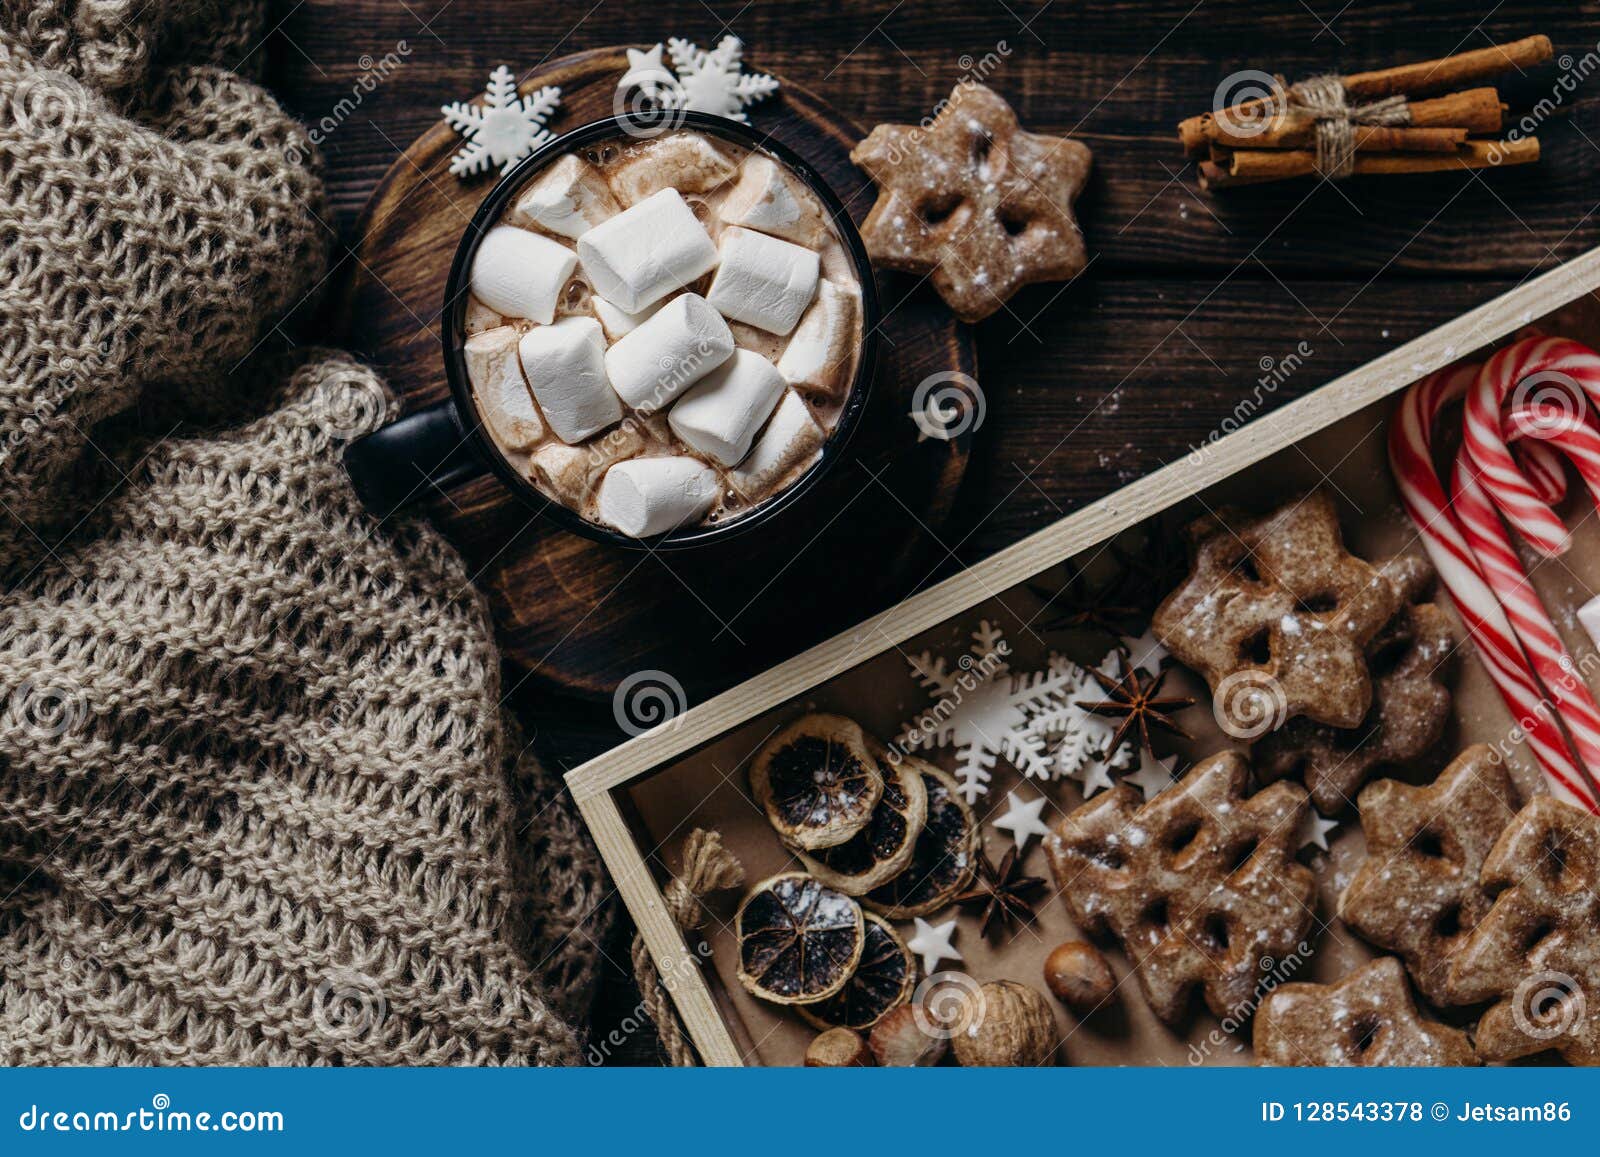 Hot Chocolate, Winter Sweets and Knitted Blanket Stock Photo - Image of ...